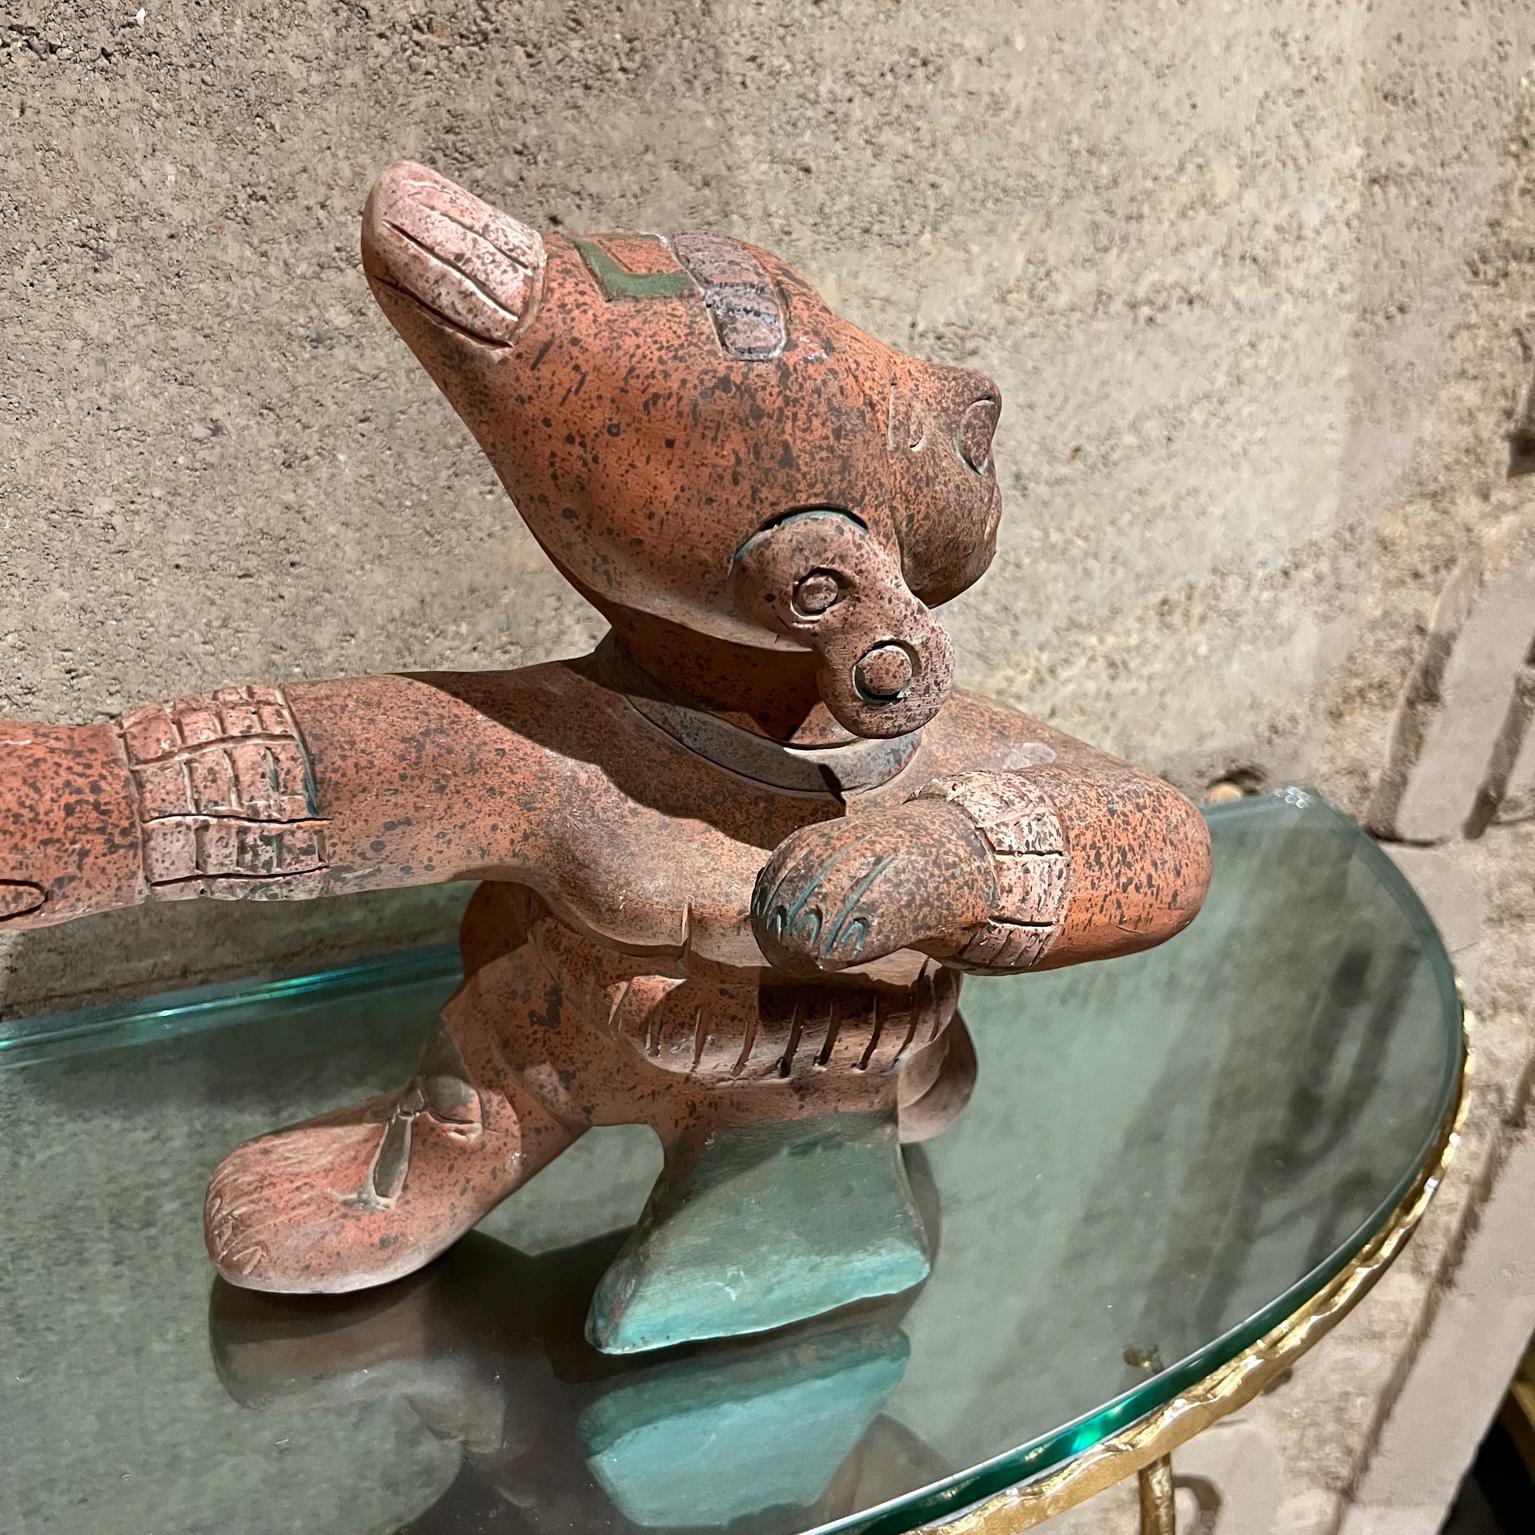 20th Century Mayan Native Artwork Mex Indian Intricate Pottery Figurine Sculpture For Sale